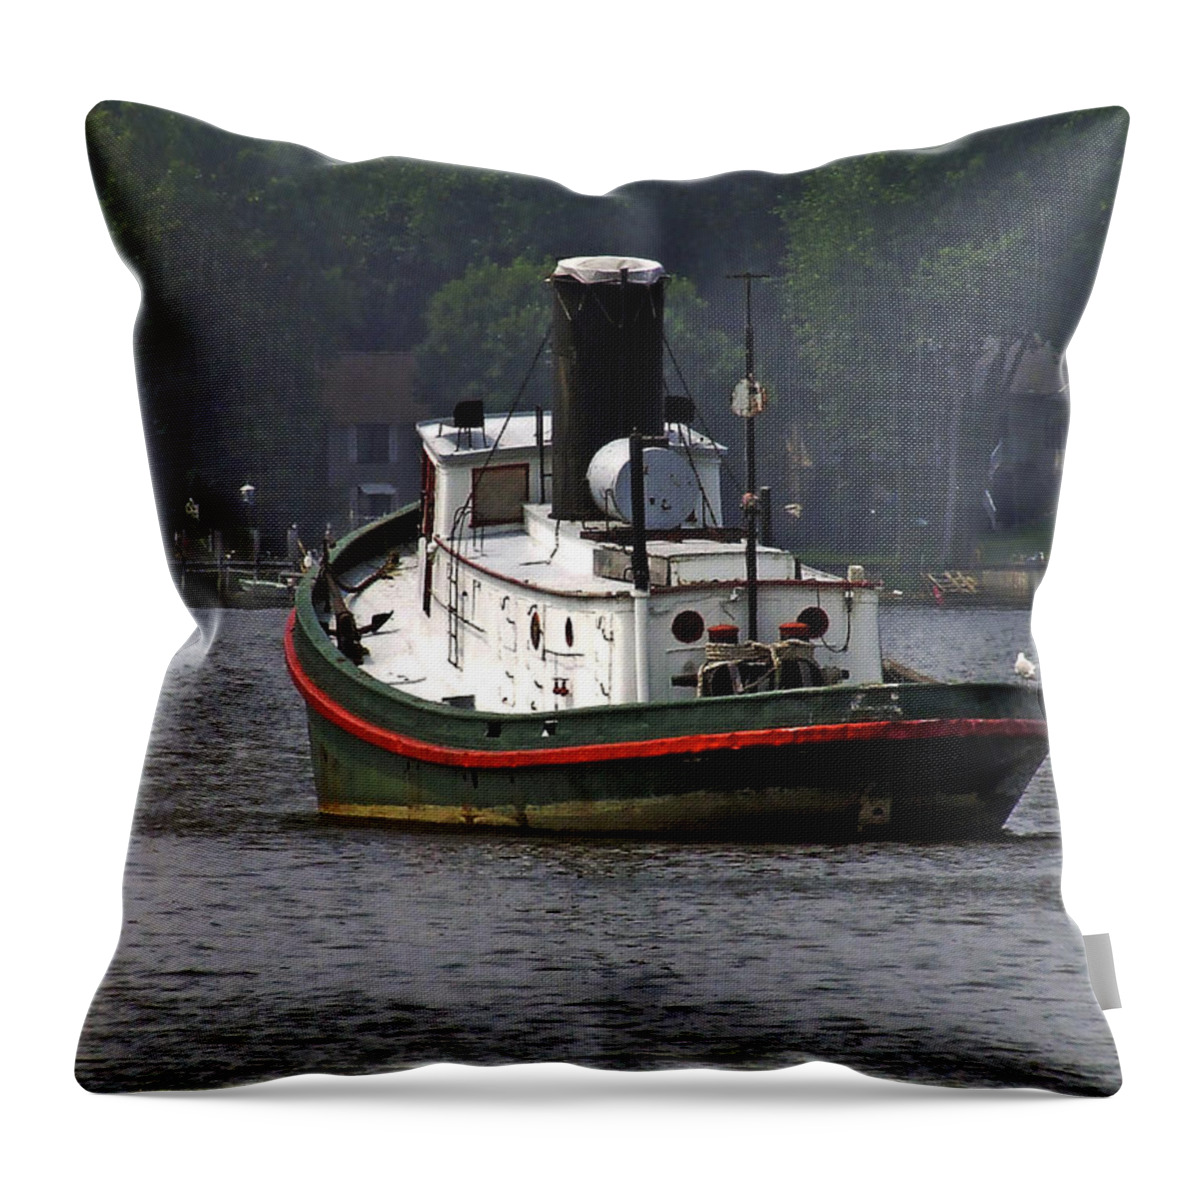 Idle Throw Pillow featuring the photograph Idle Tugboat by Richard Gregurich